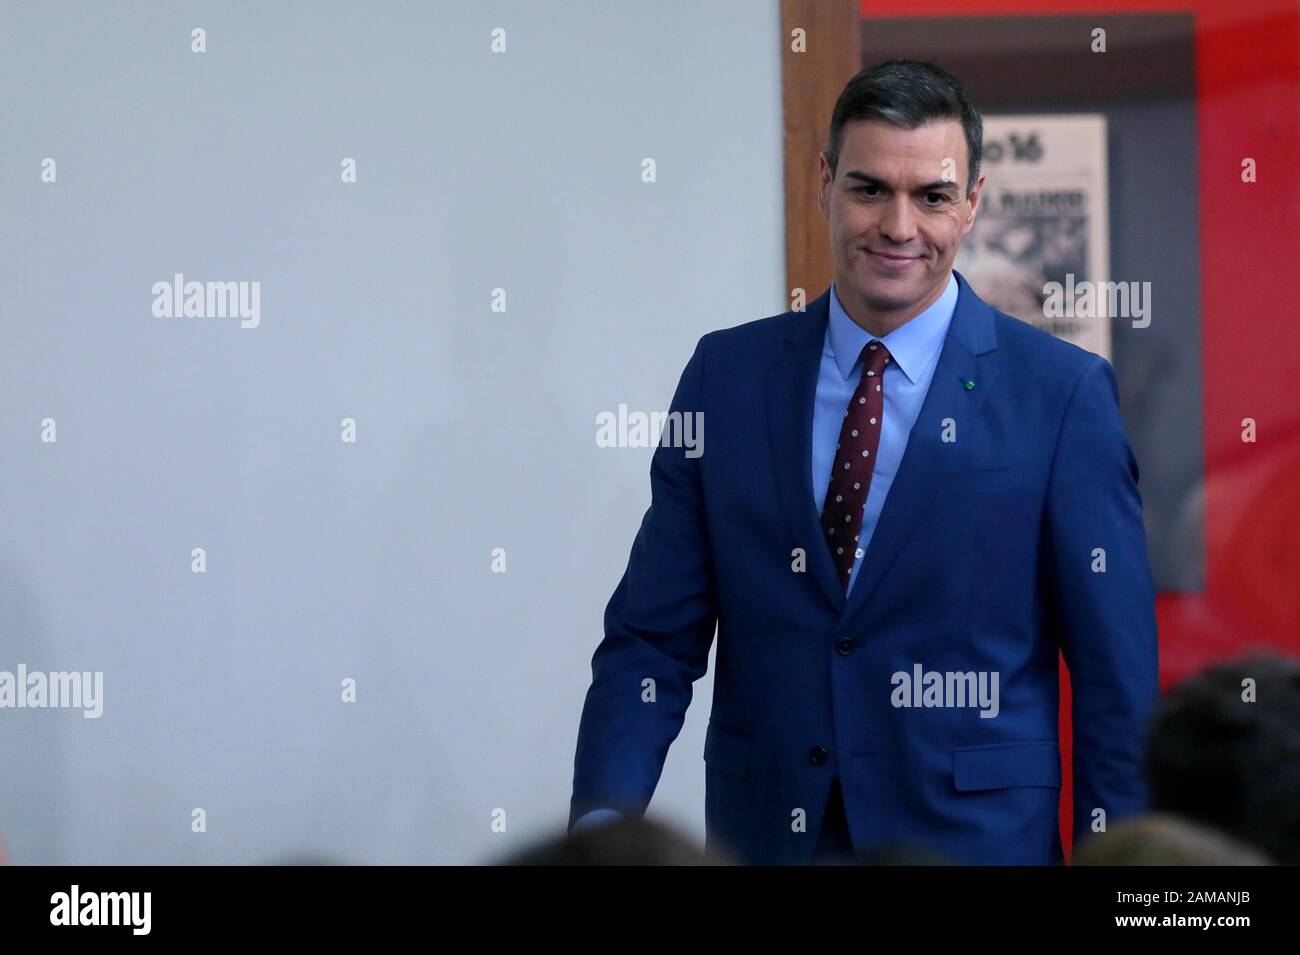 Madrid Spain; 12/01/2020.-Institutional Declaration of spanish President  Pedro Sánchez before the media in the Palacio de La Moncloa, after  transmitting to King Felipe VI the names of the people who will make